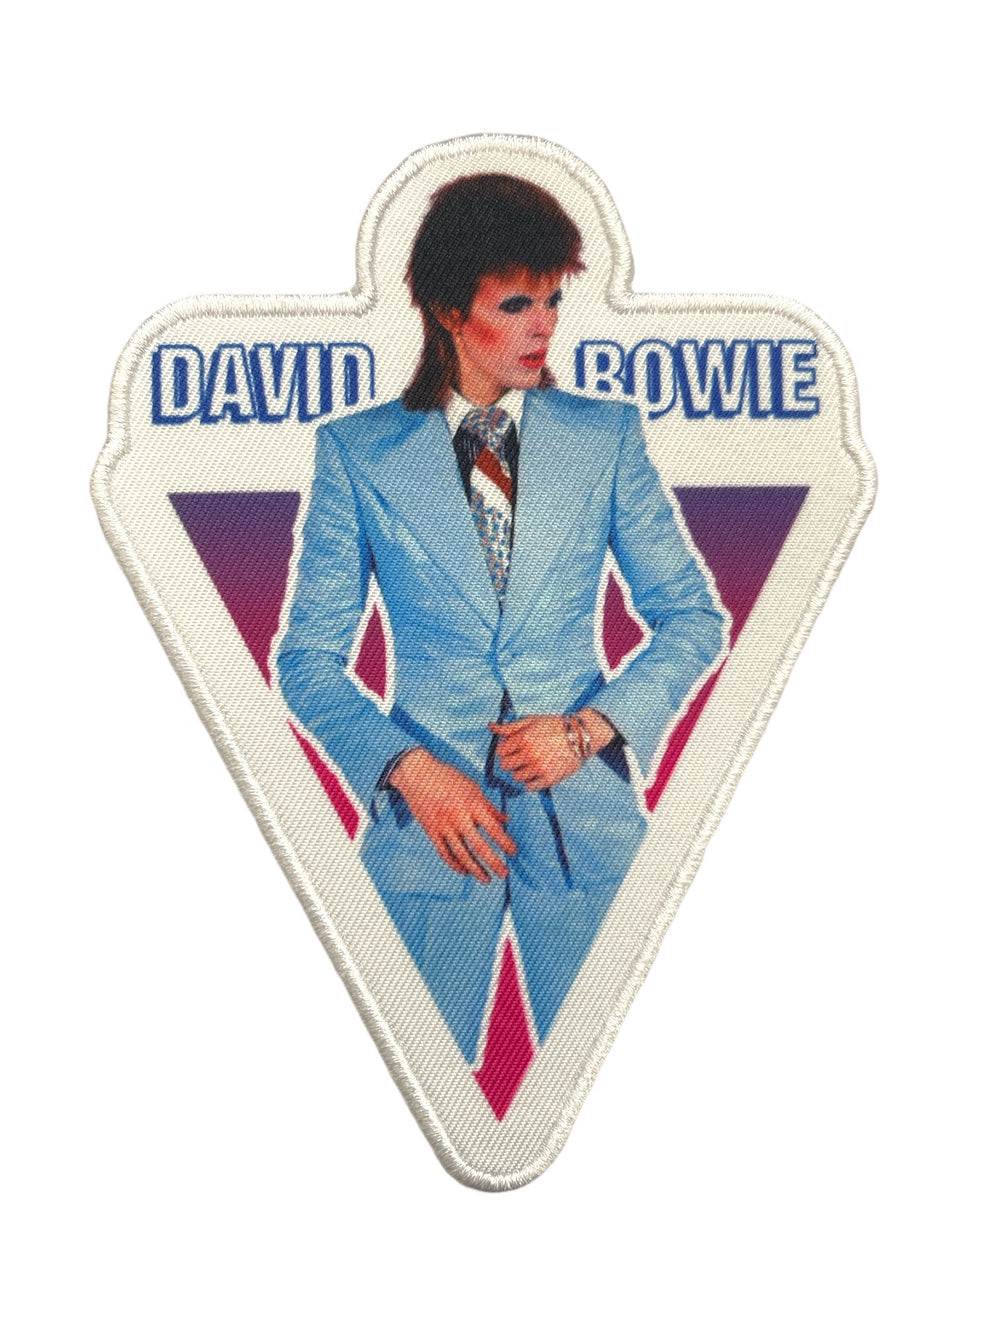 David Bowie Pin Ups Official Woven Patch Brand New